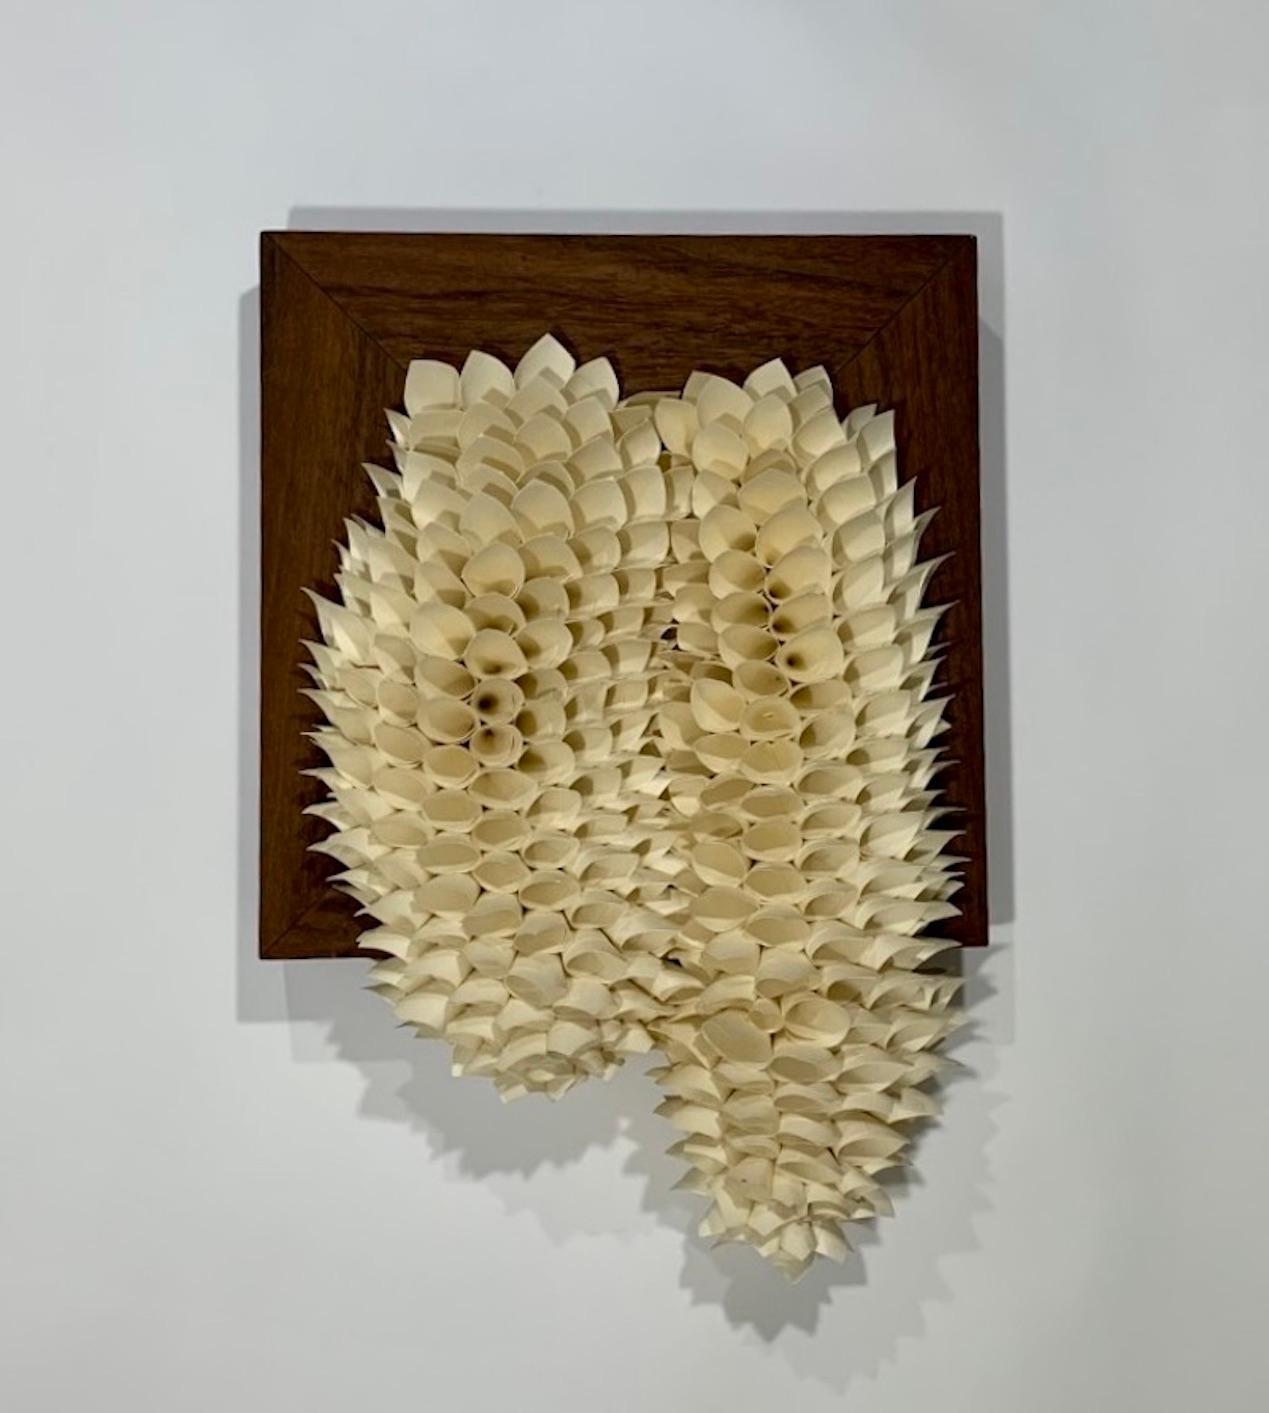 Paper Sculpture. Wall Hanging: 'Untitled Framed'